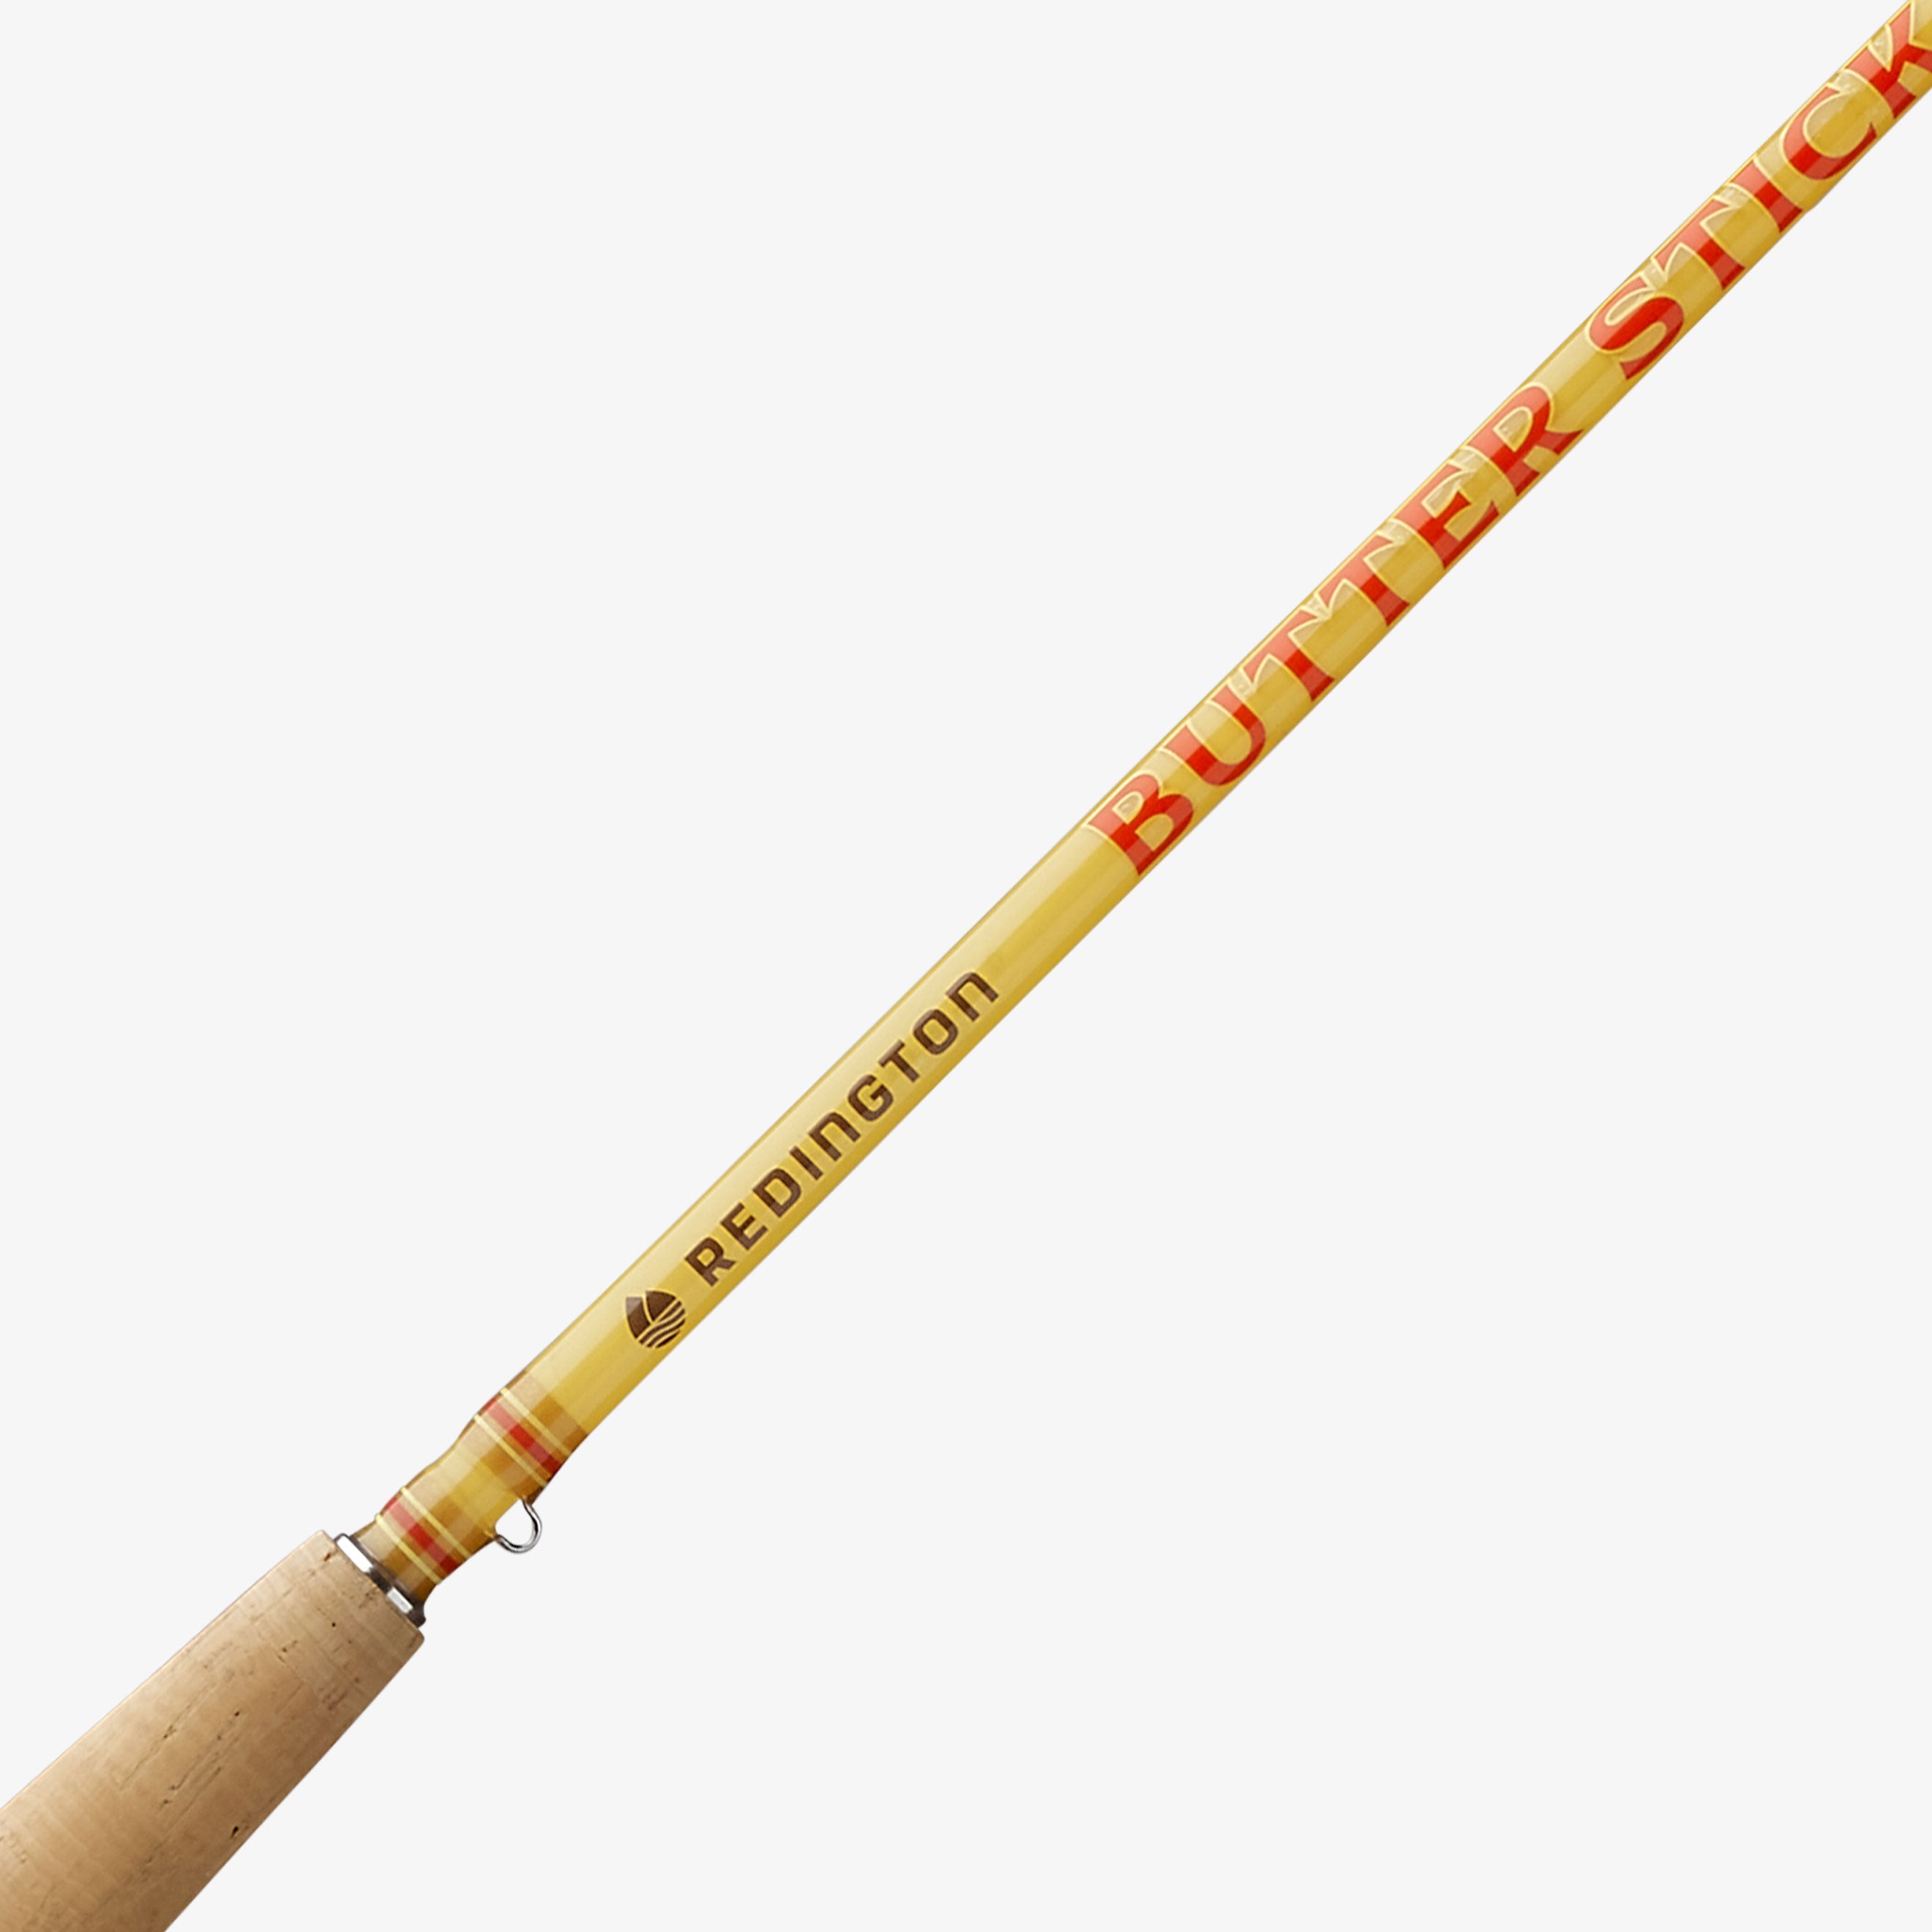 BUTTER STICK Fly Fishing Rod 4 Weight, 7ft 6in